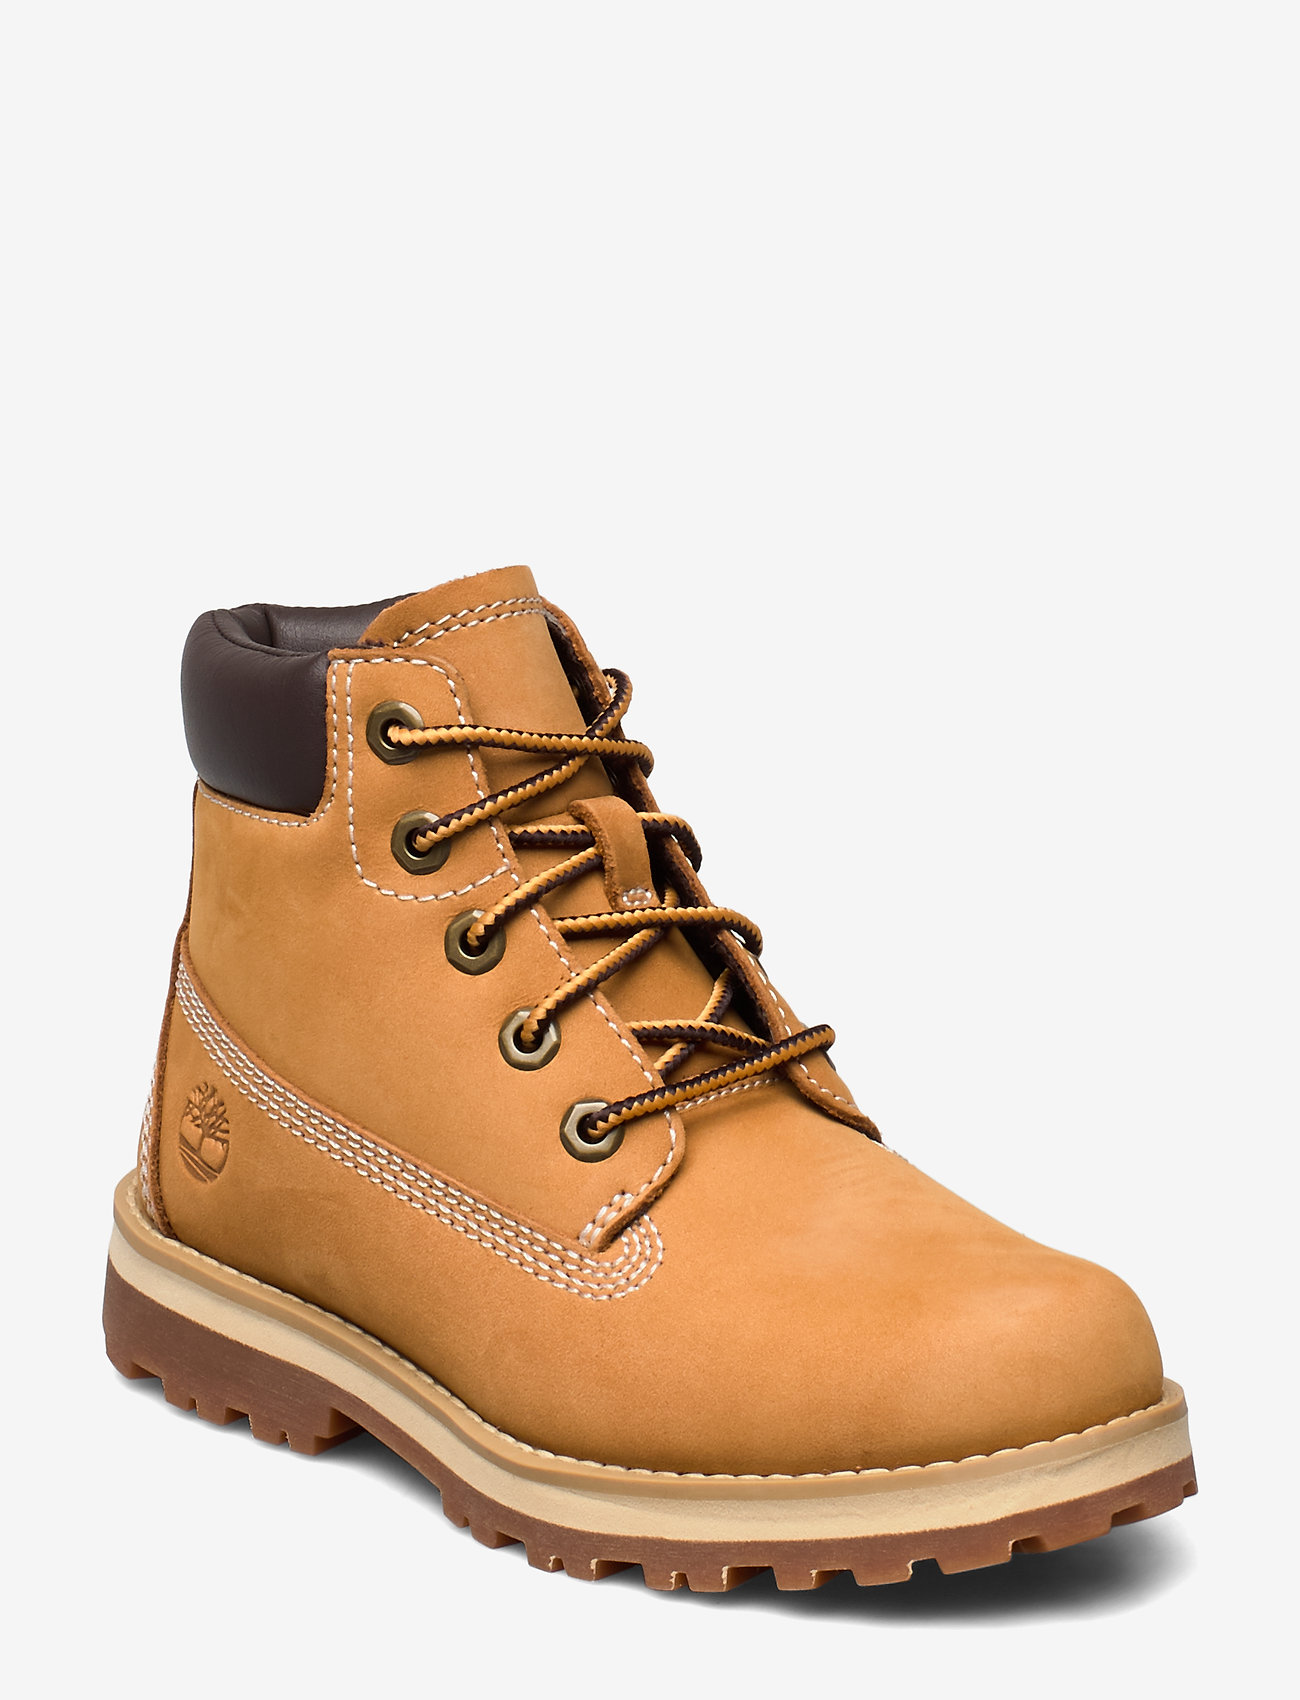 Timberland Courma Kid Traditional6in - Boots | Boozt.com